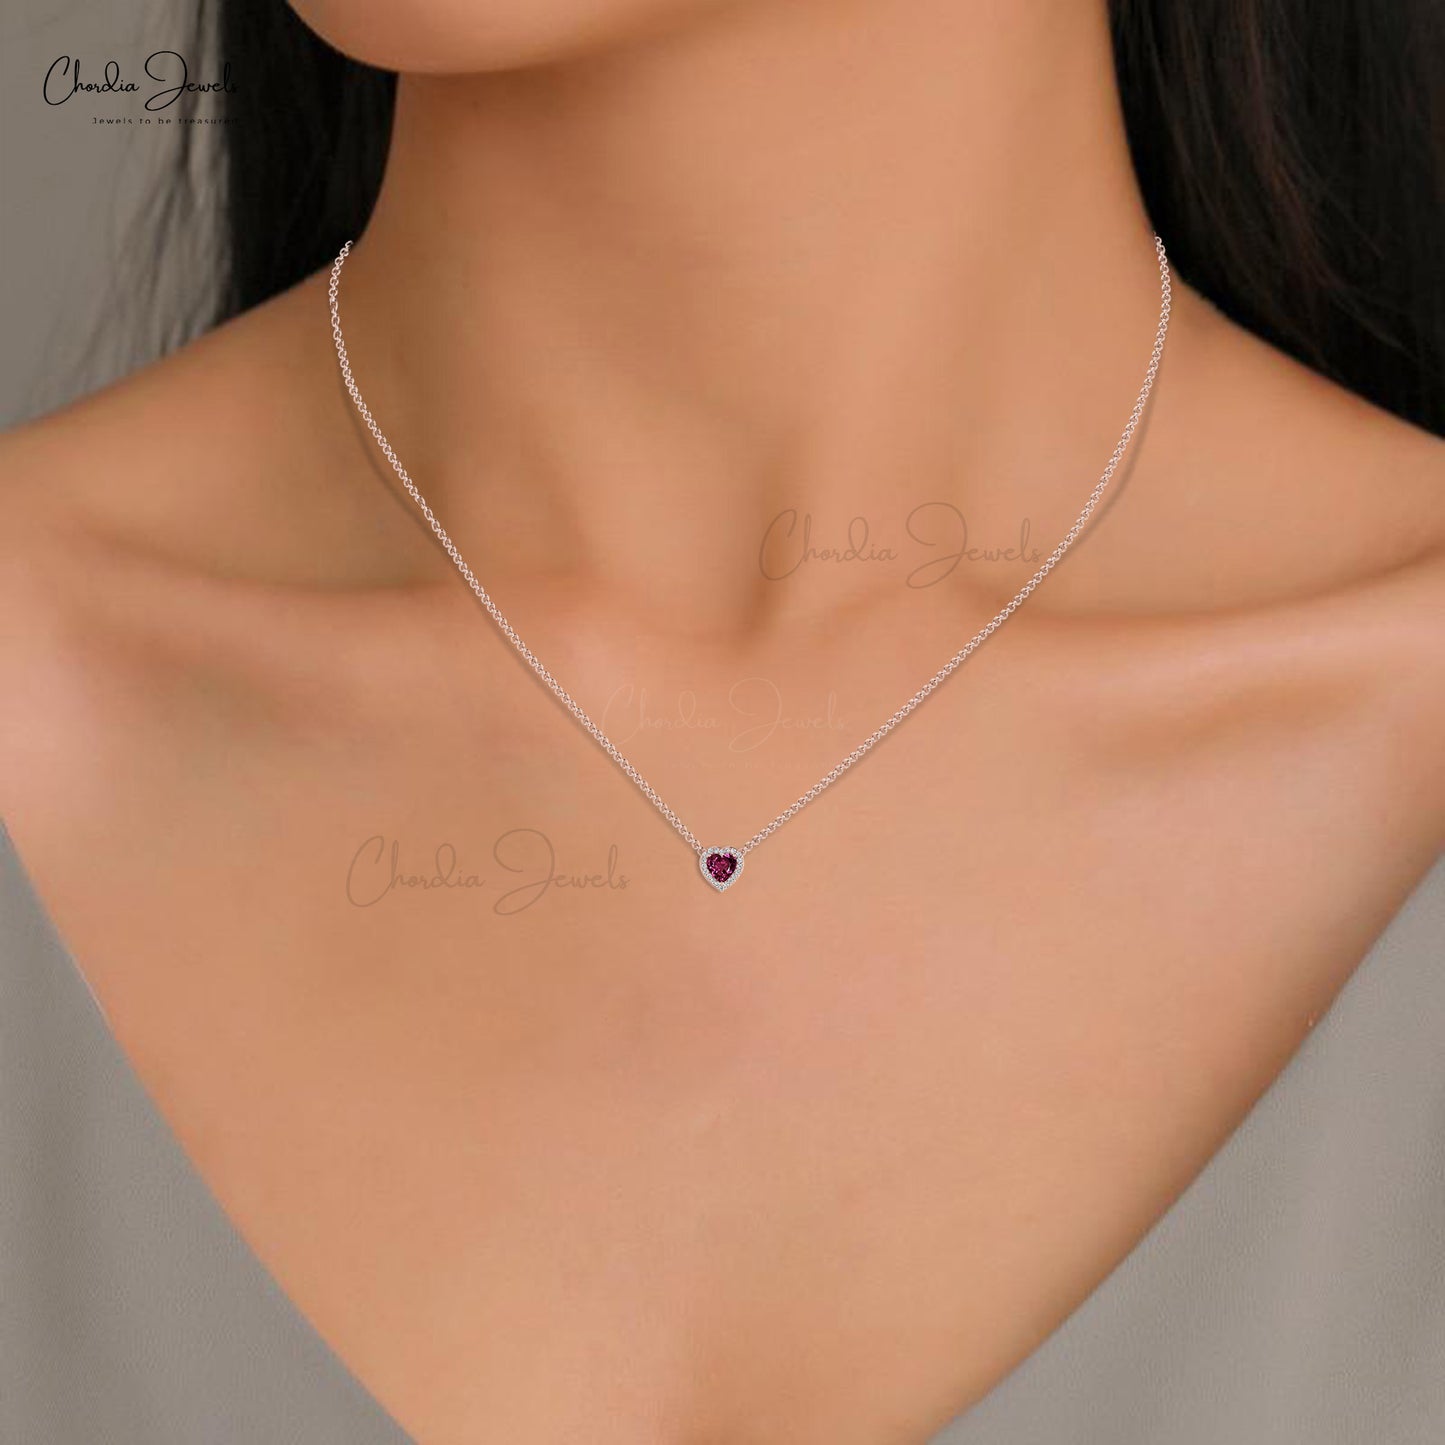 Load image into Gallery viewer, 14k Solid Gold Diamond Halo Necklace, Natural Rhodolite Garnet Necklace, 5mm Heart Shape Gemstone Necklace Gift for Her
